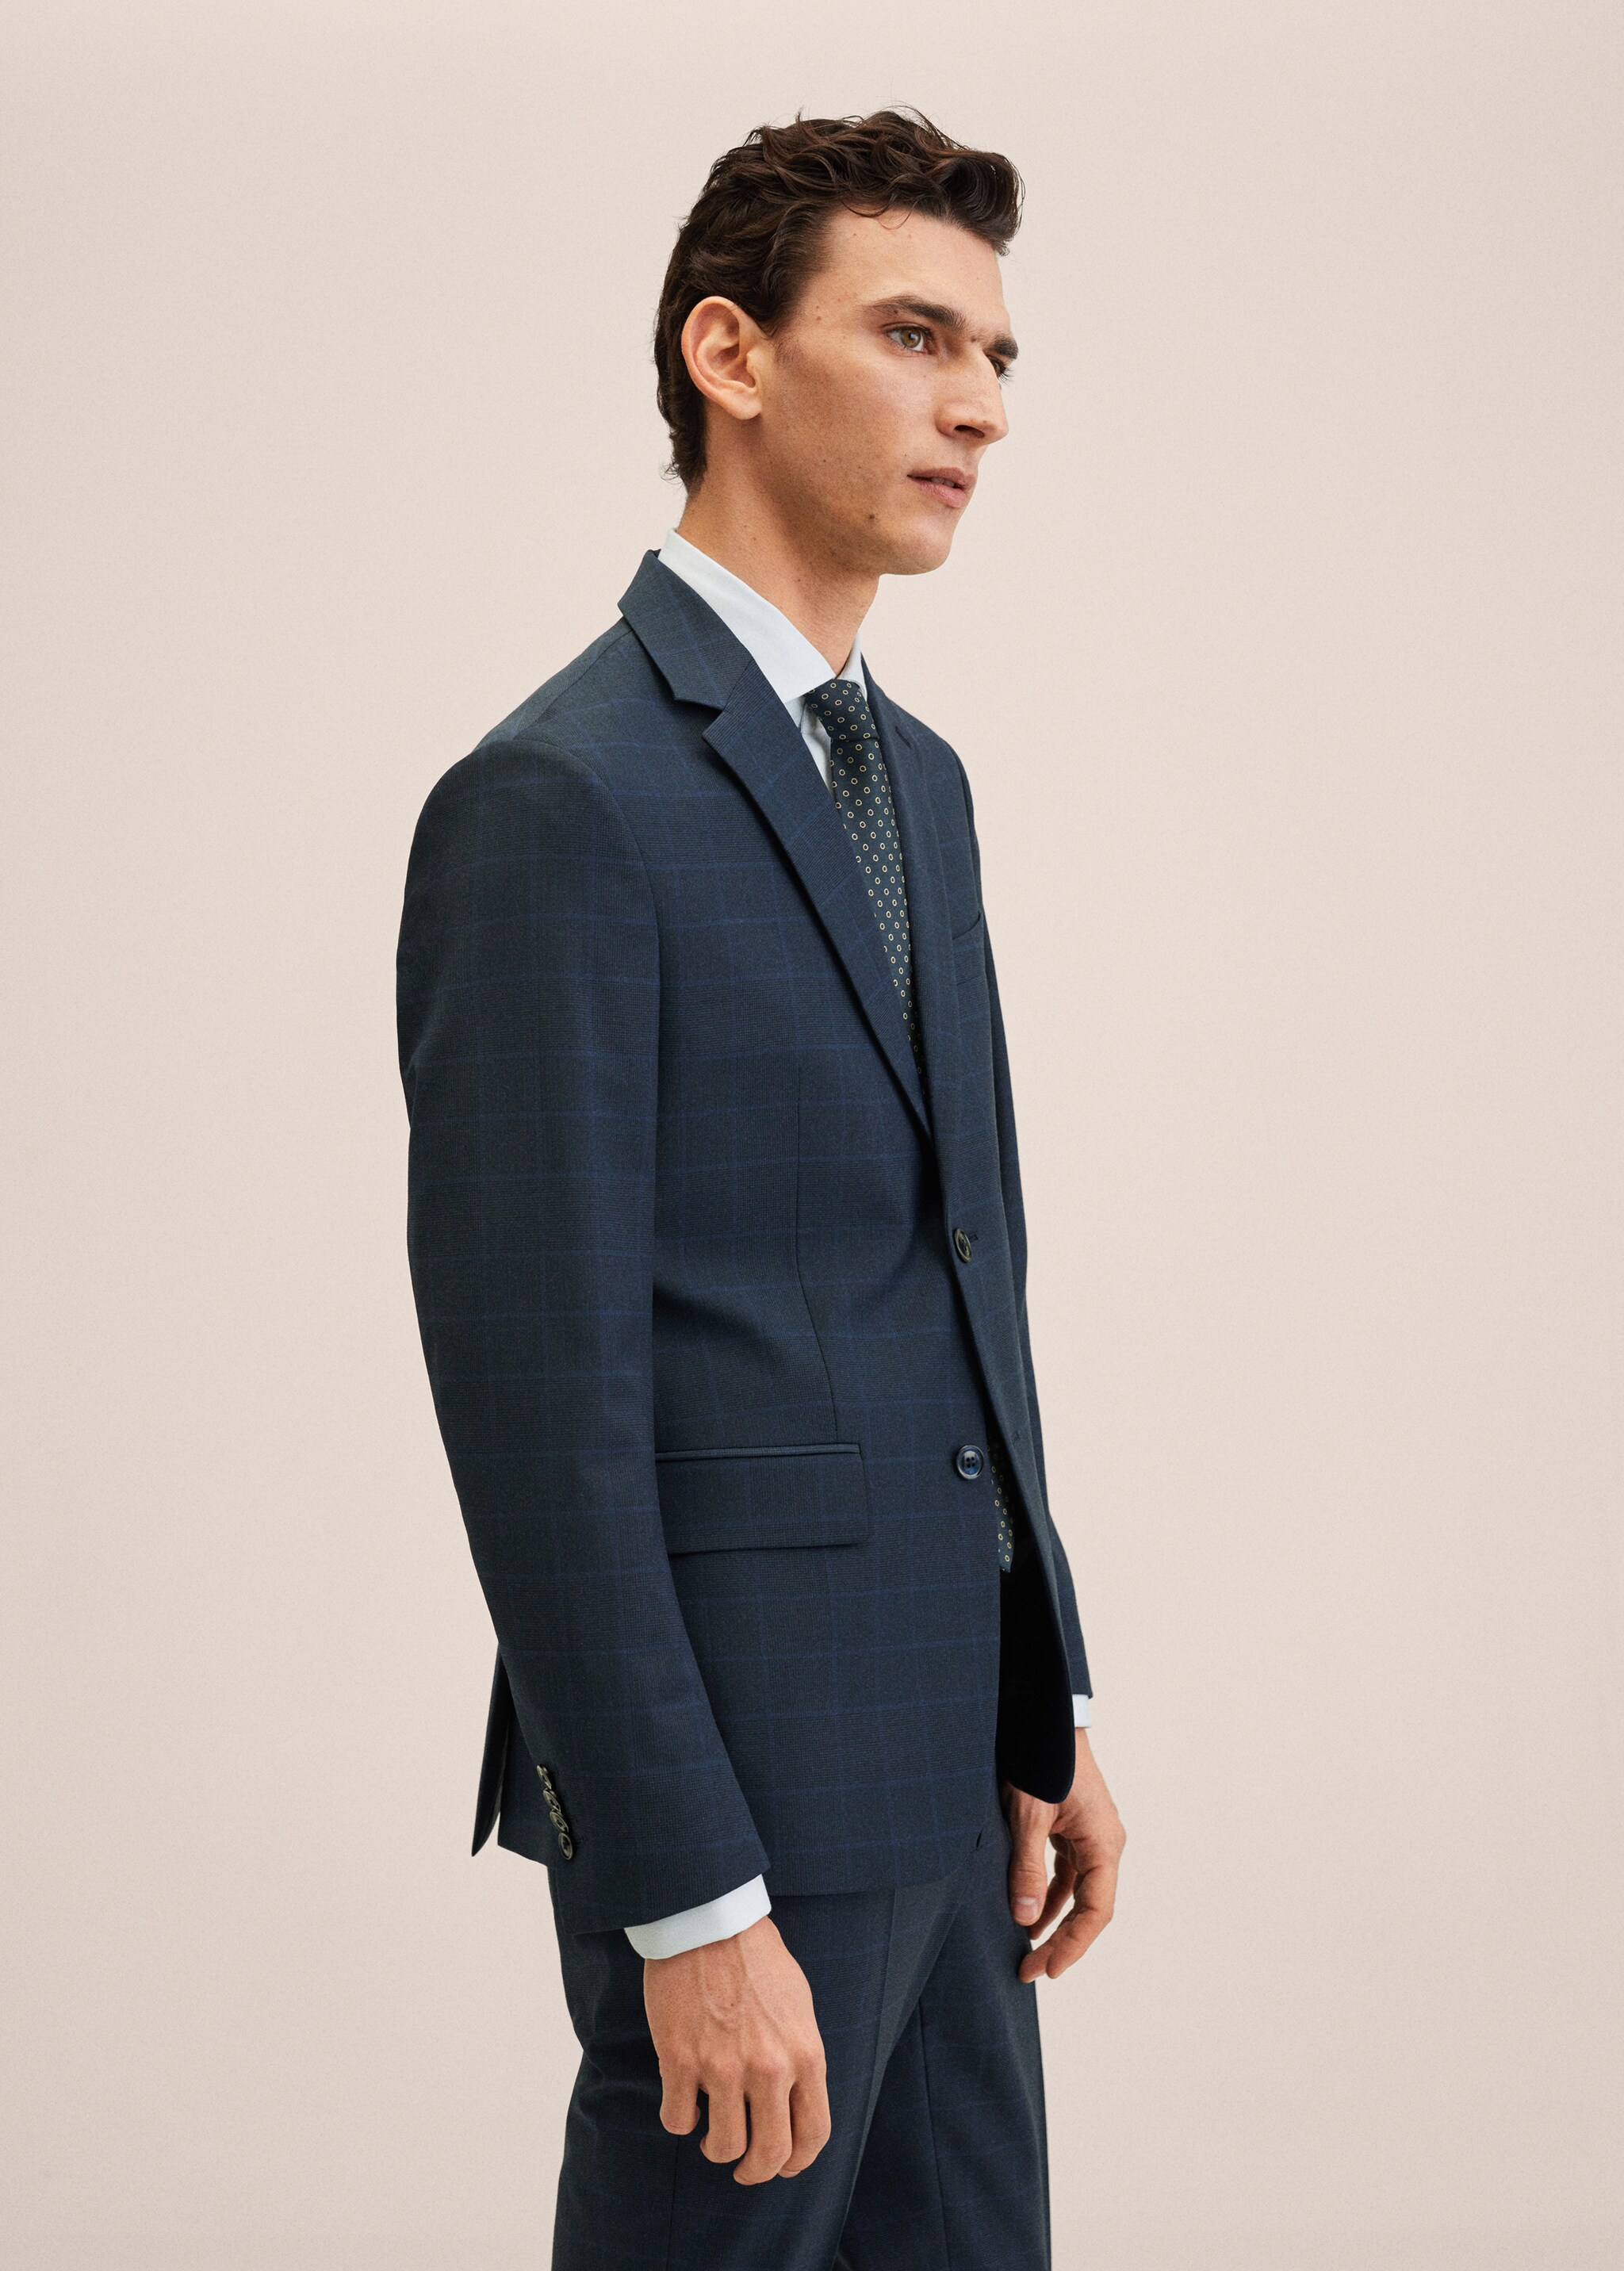 Wool suit jacket - Details of the article 3